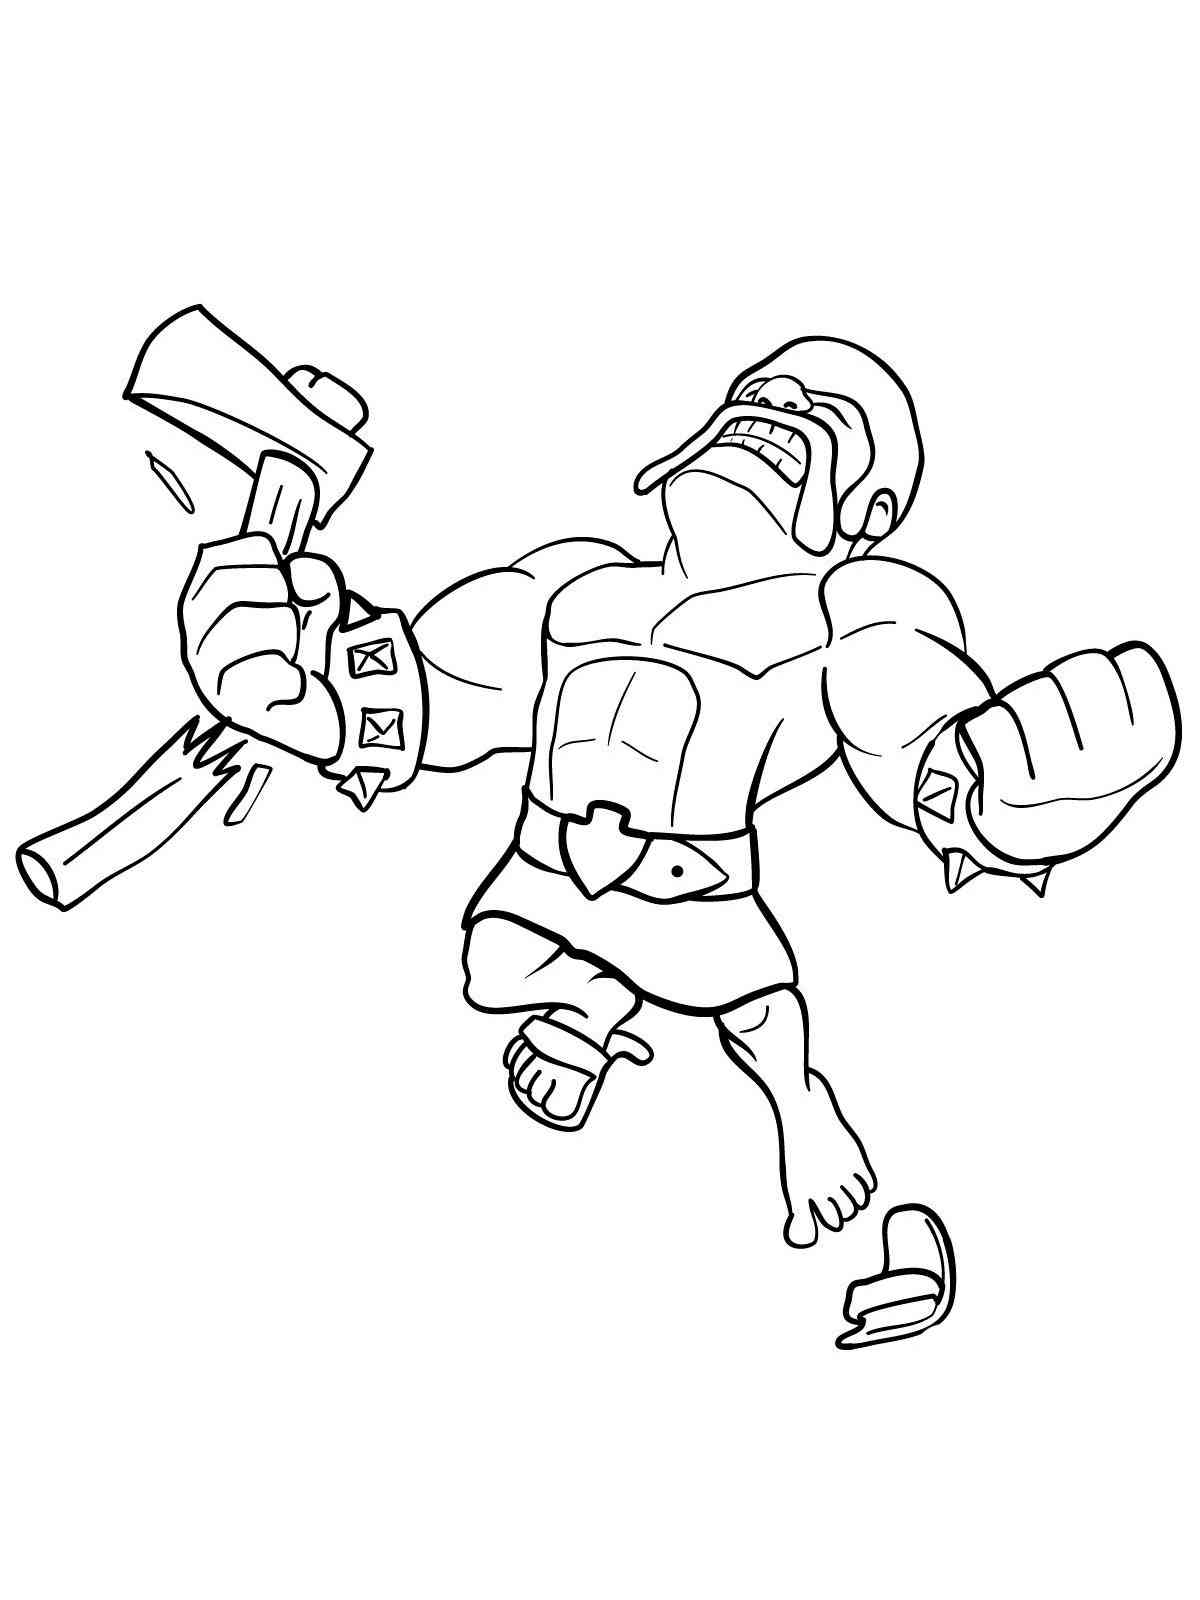 Barbarian with Axe Clash Royale coloring page